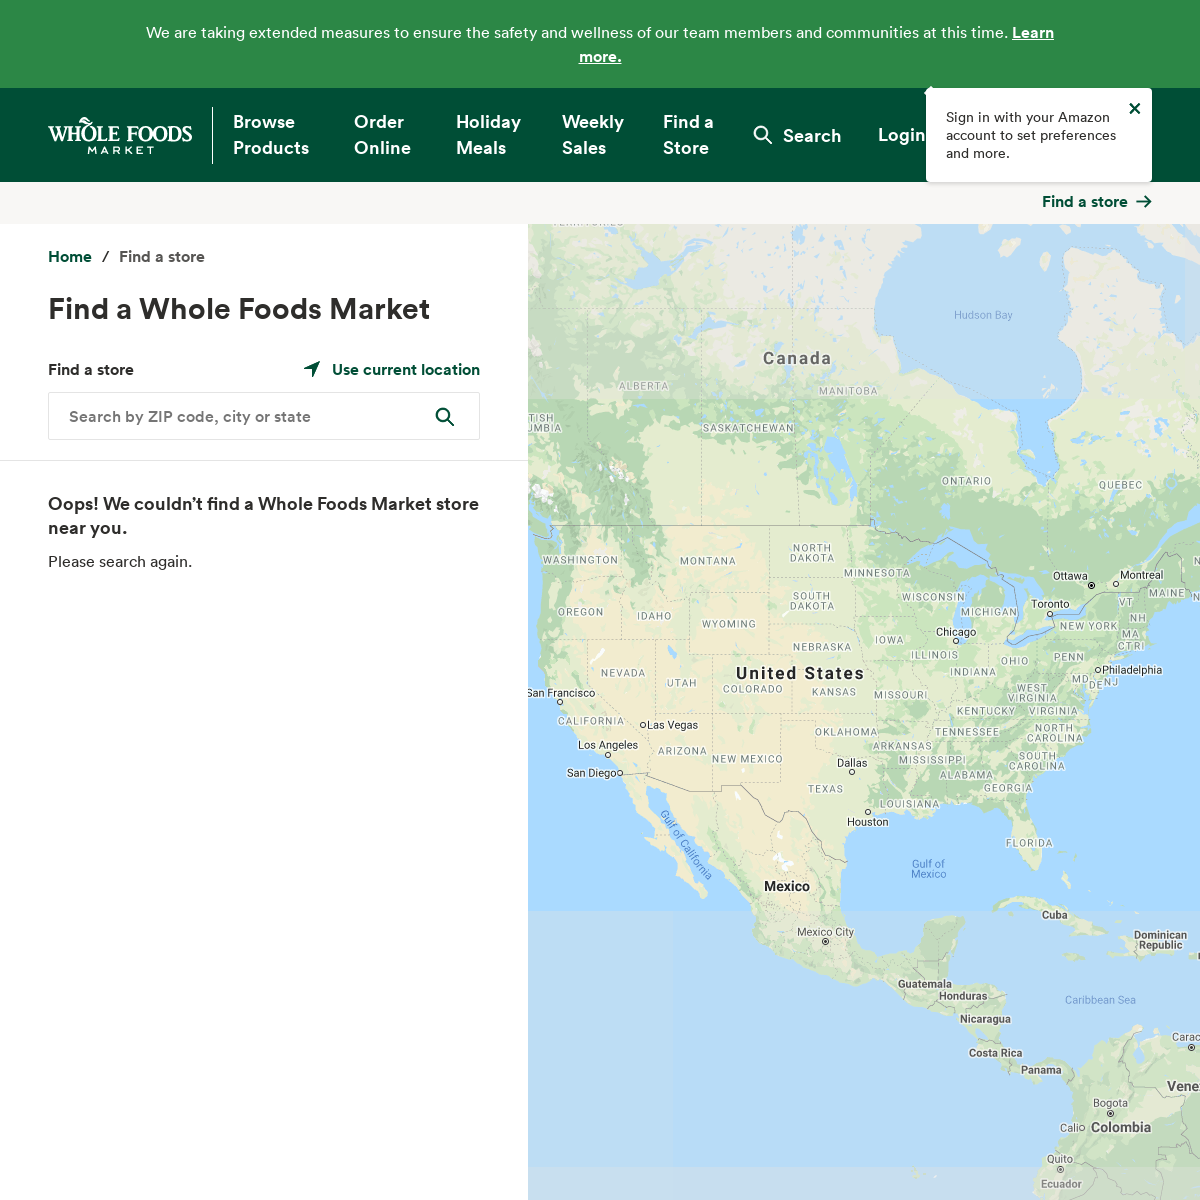 A complete backup of 365bywholefoods.com